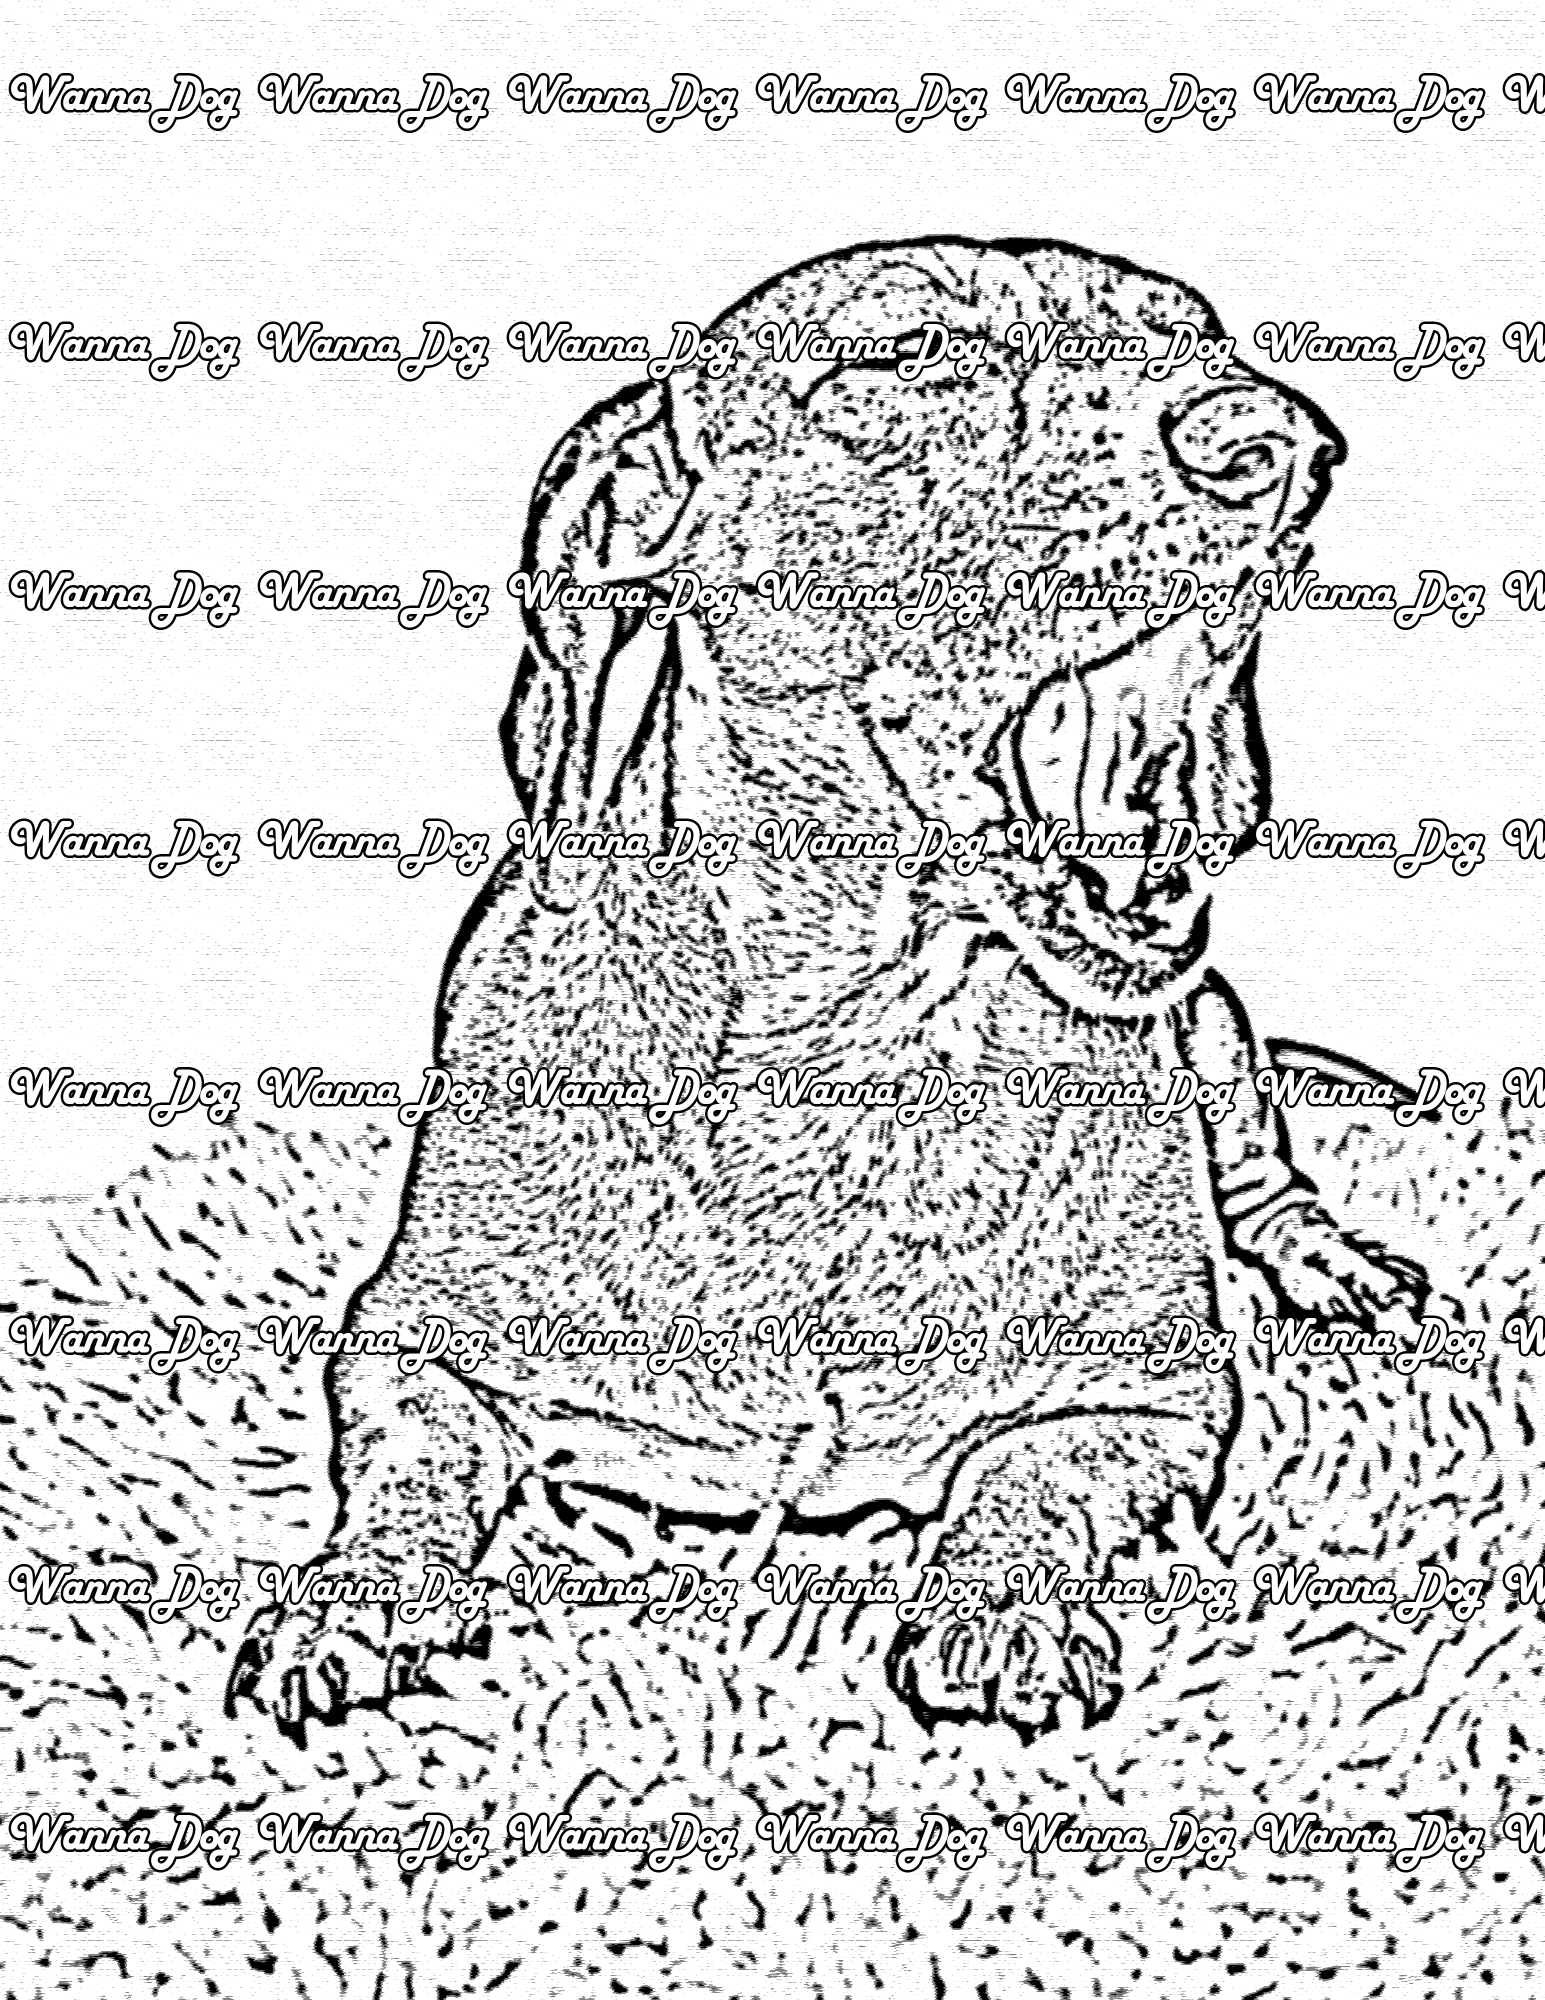 Dachshund Coloring Page of a Dachshund yawning